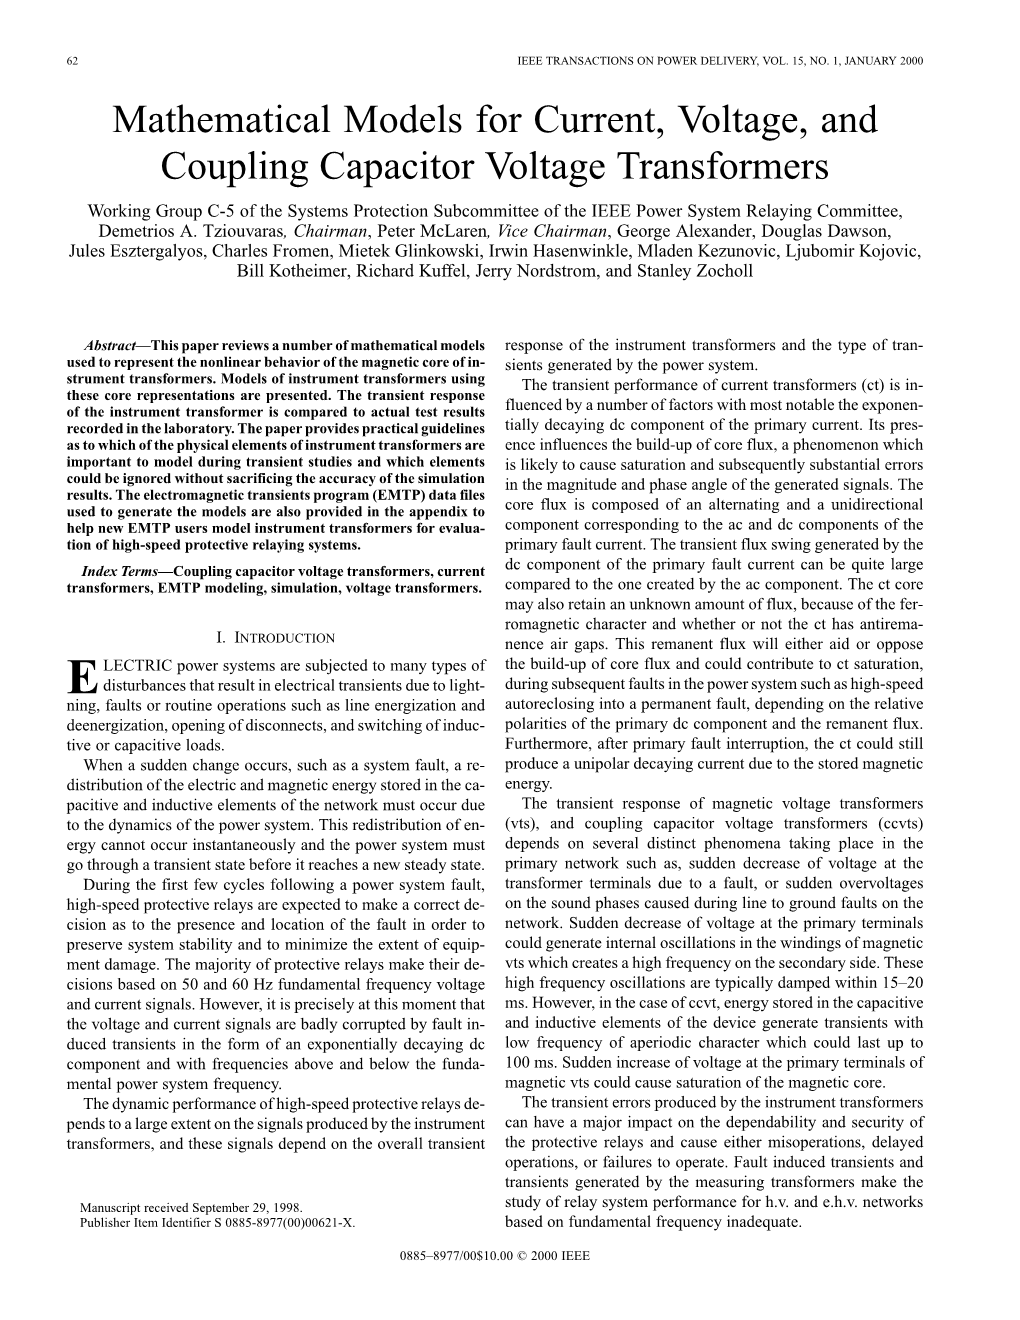 Mathematical Models for Current, Voltage, and Coupling Capacitor